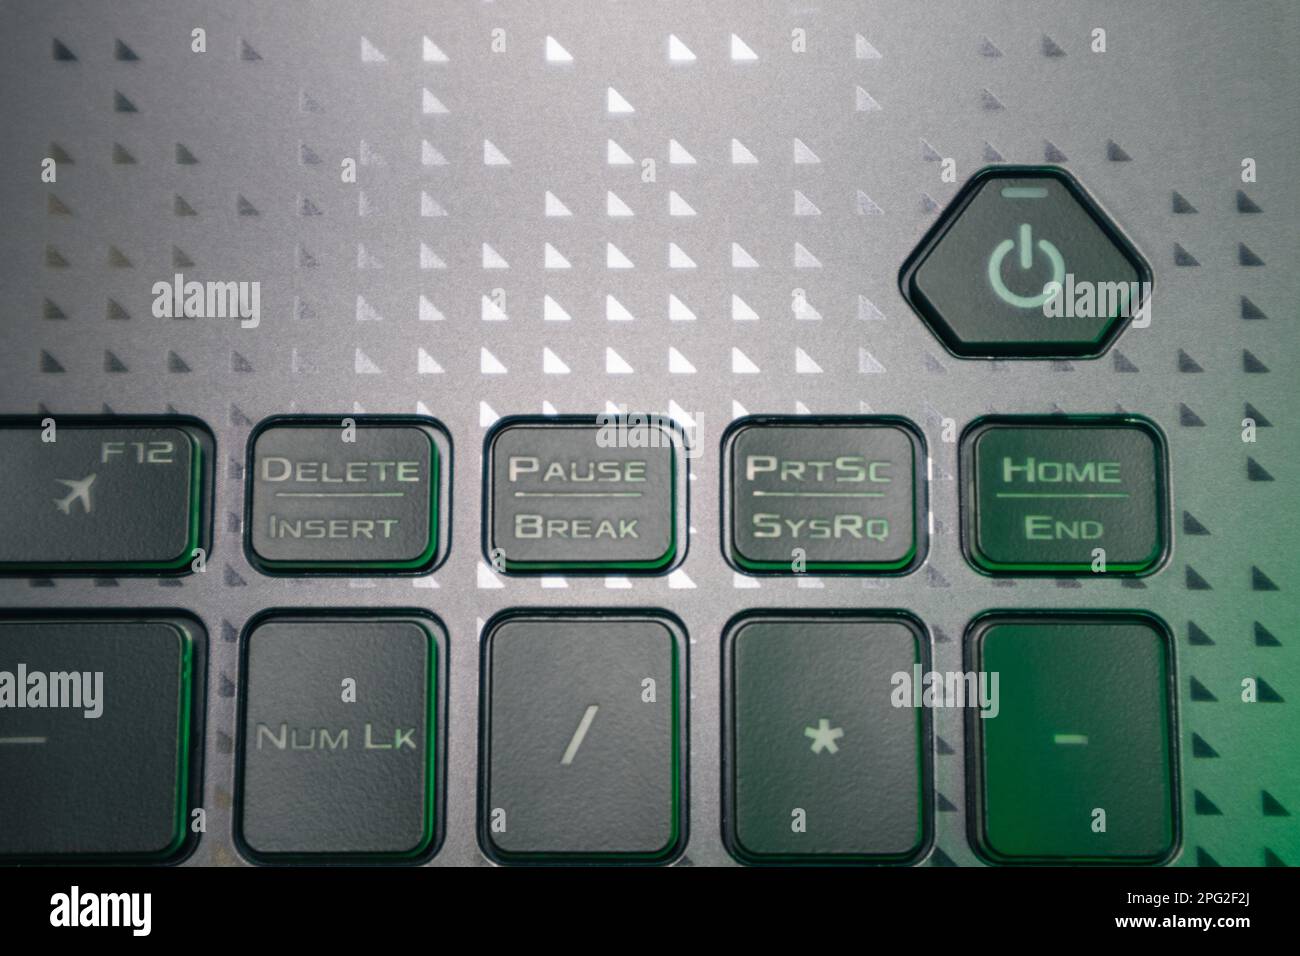 Turn on and off power key in green light. Gaming grey notebook keyboard close-up. Tech, IT, computer science background Stock Photo